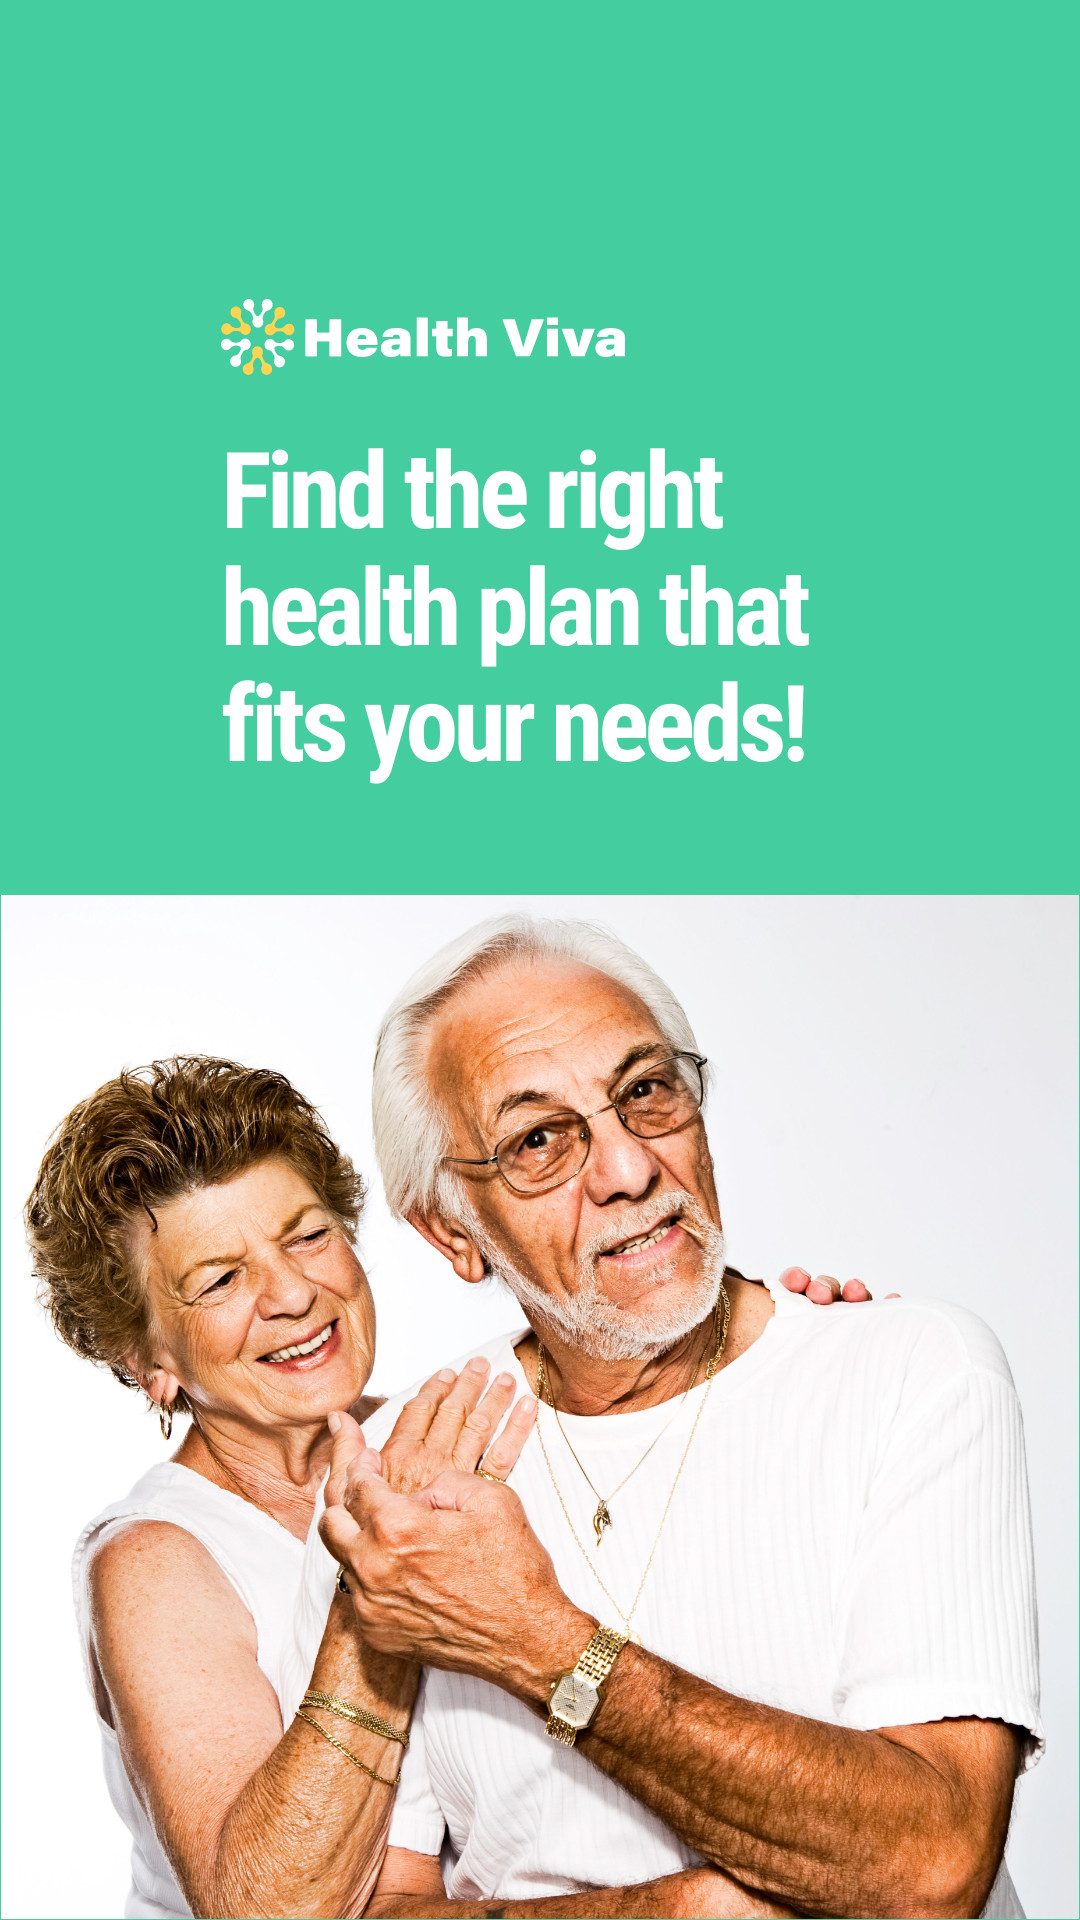 The Right Health Plan